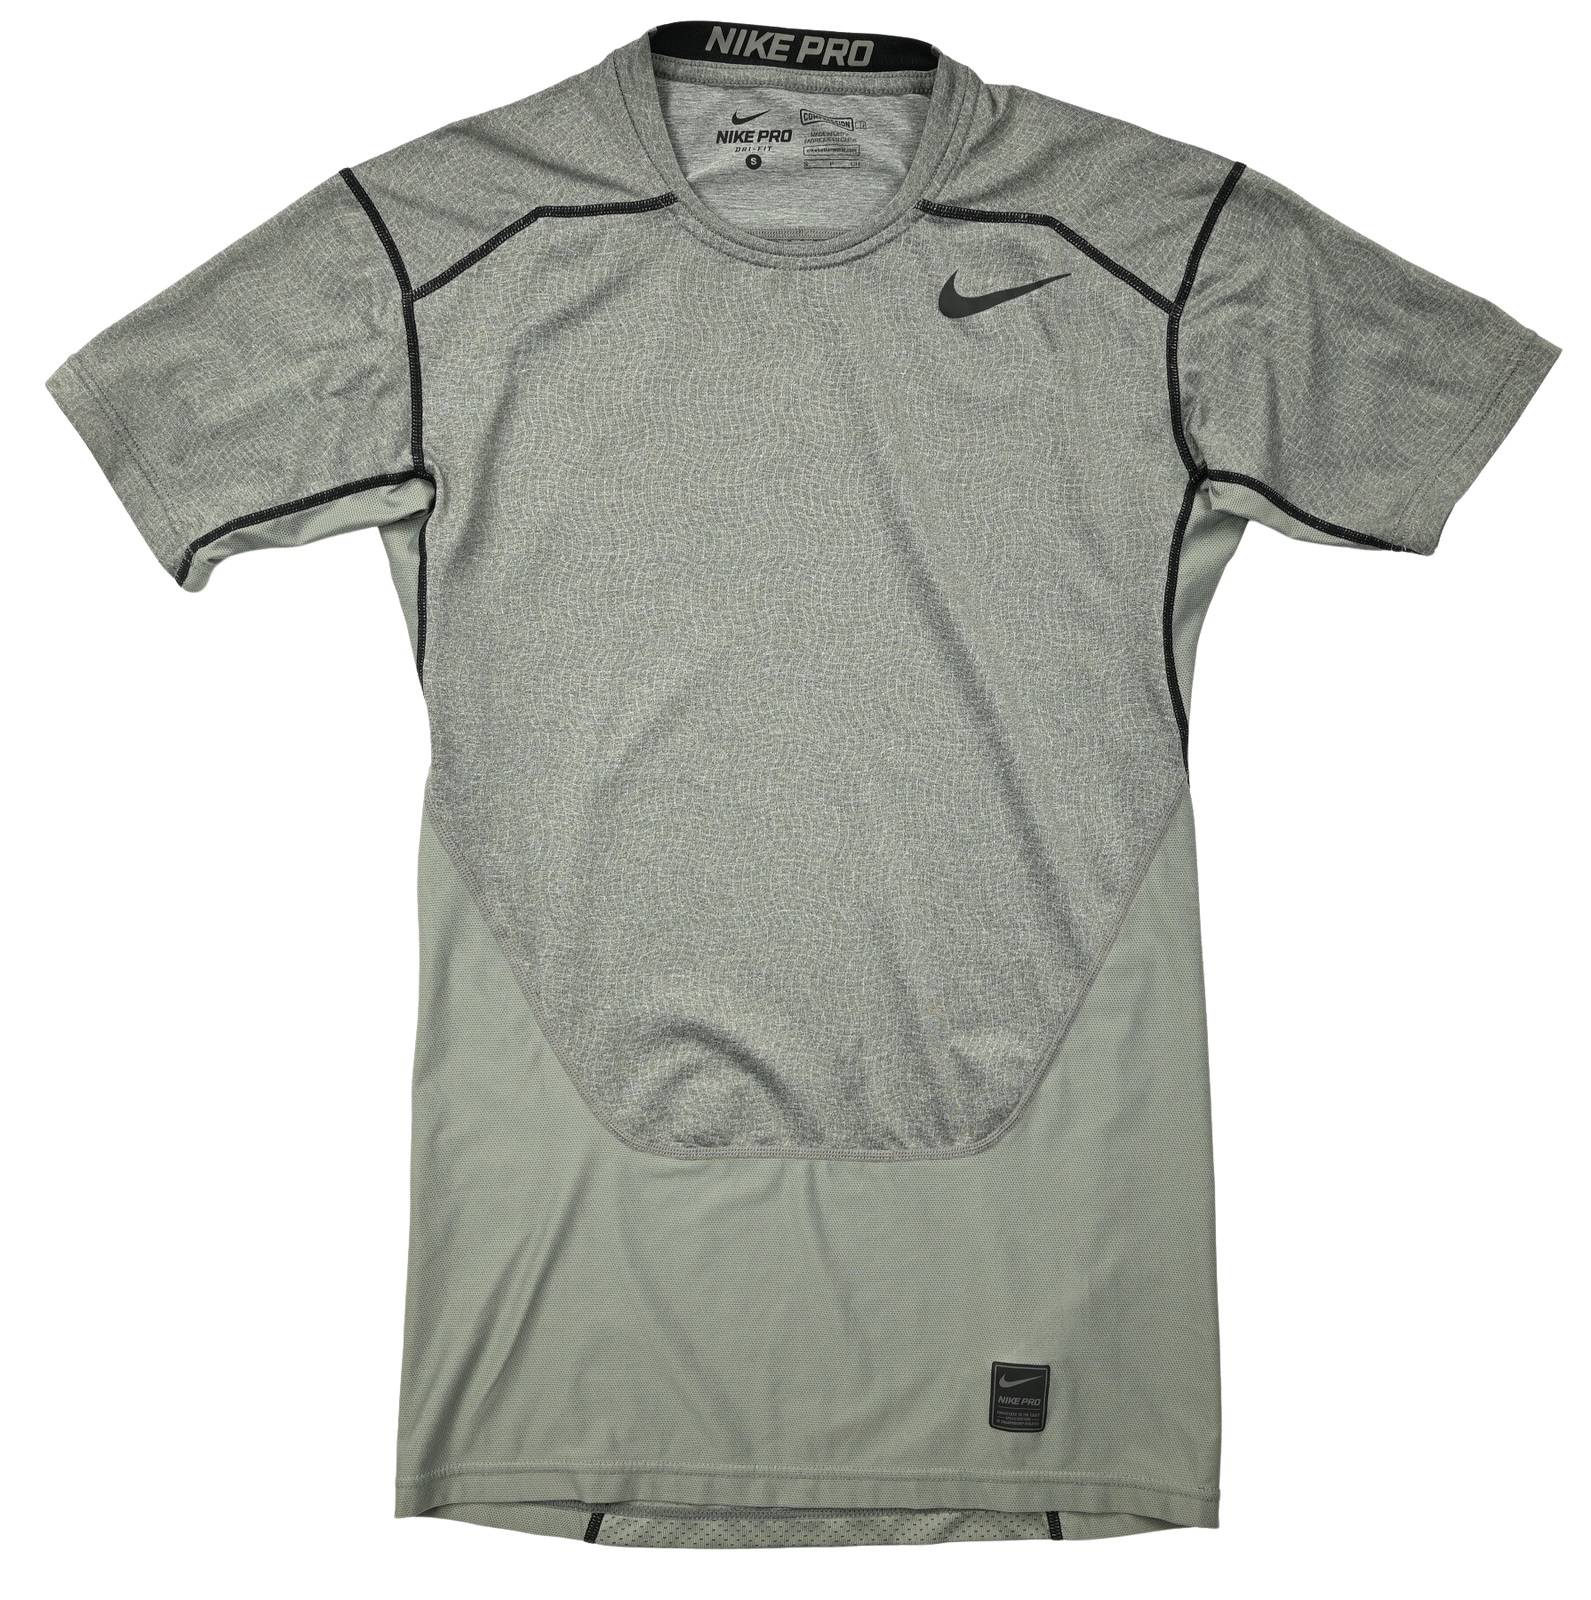 NIKE THERMAL SHIRT S Other Shirts \ Other Sports | Classic-Shirts.com